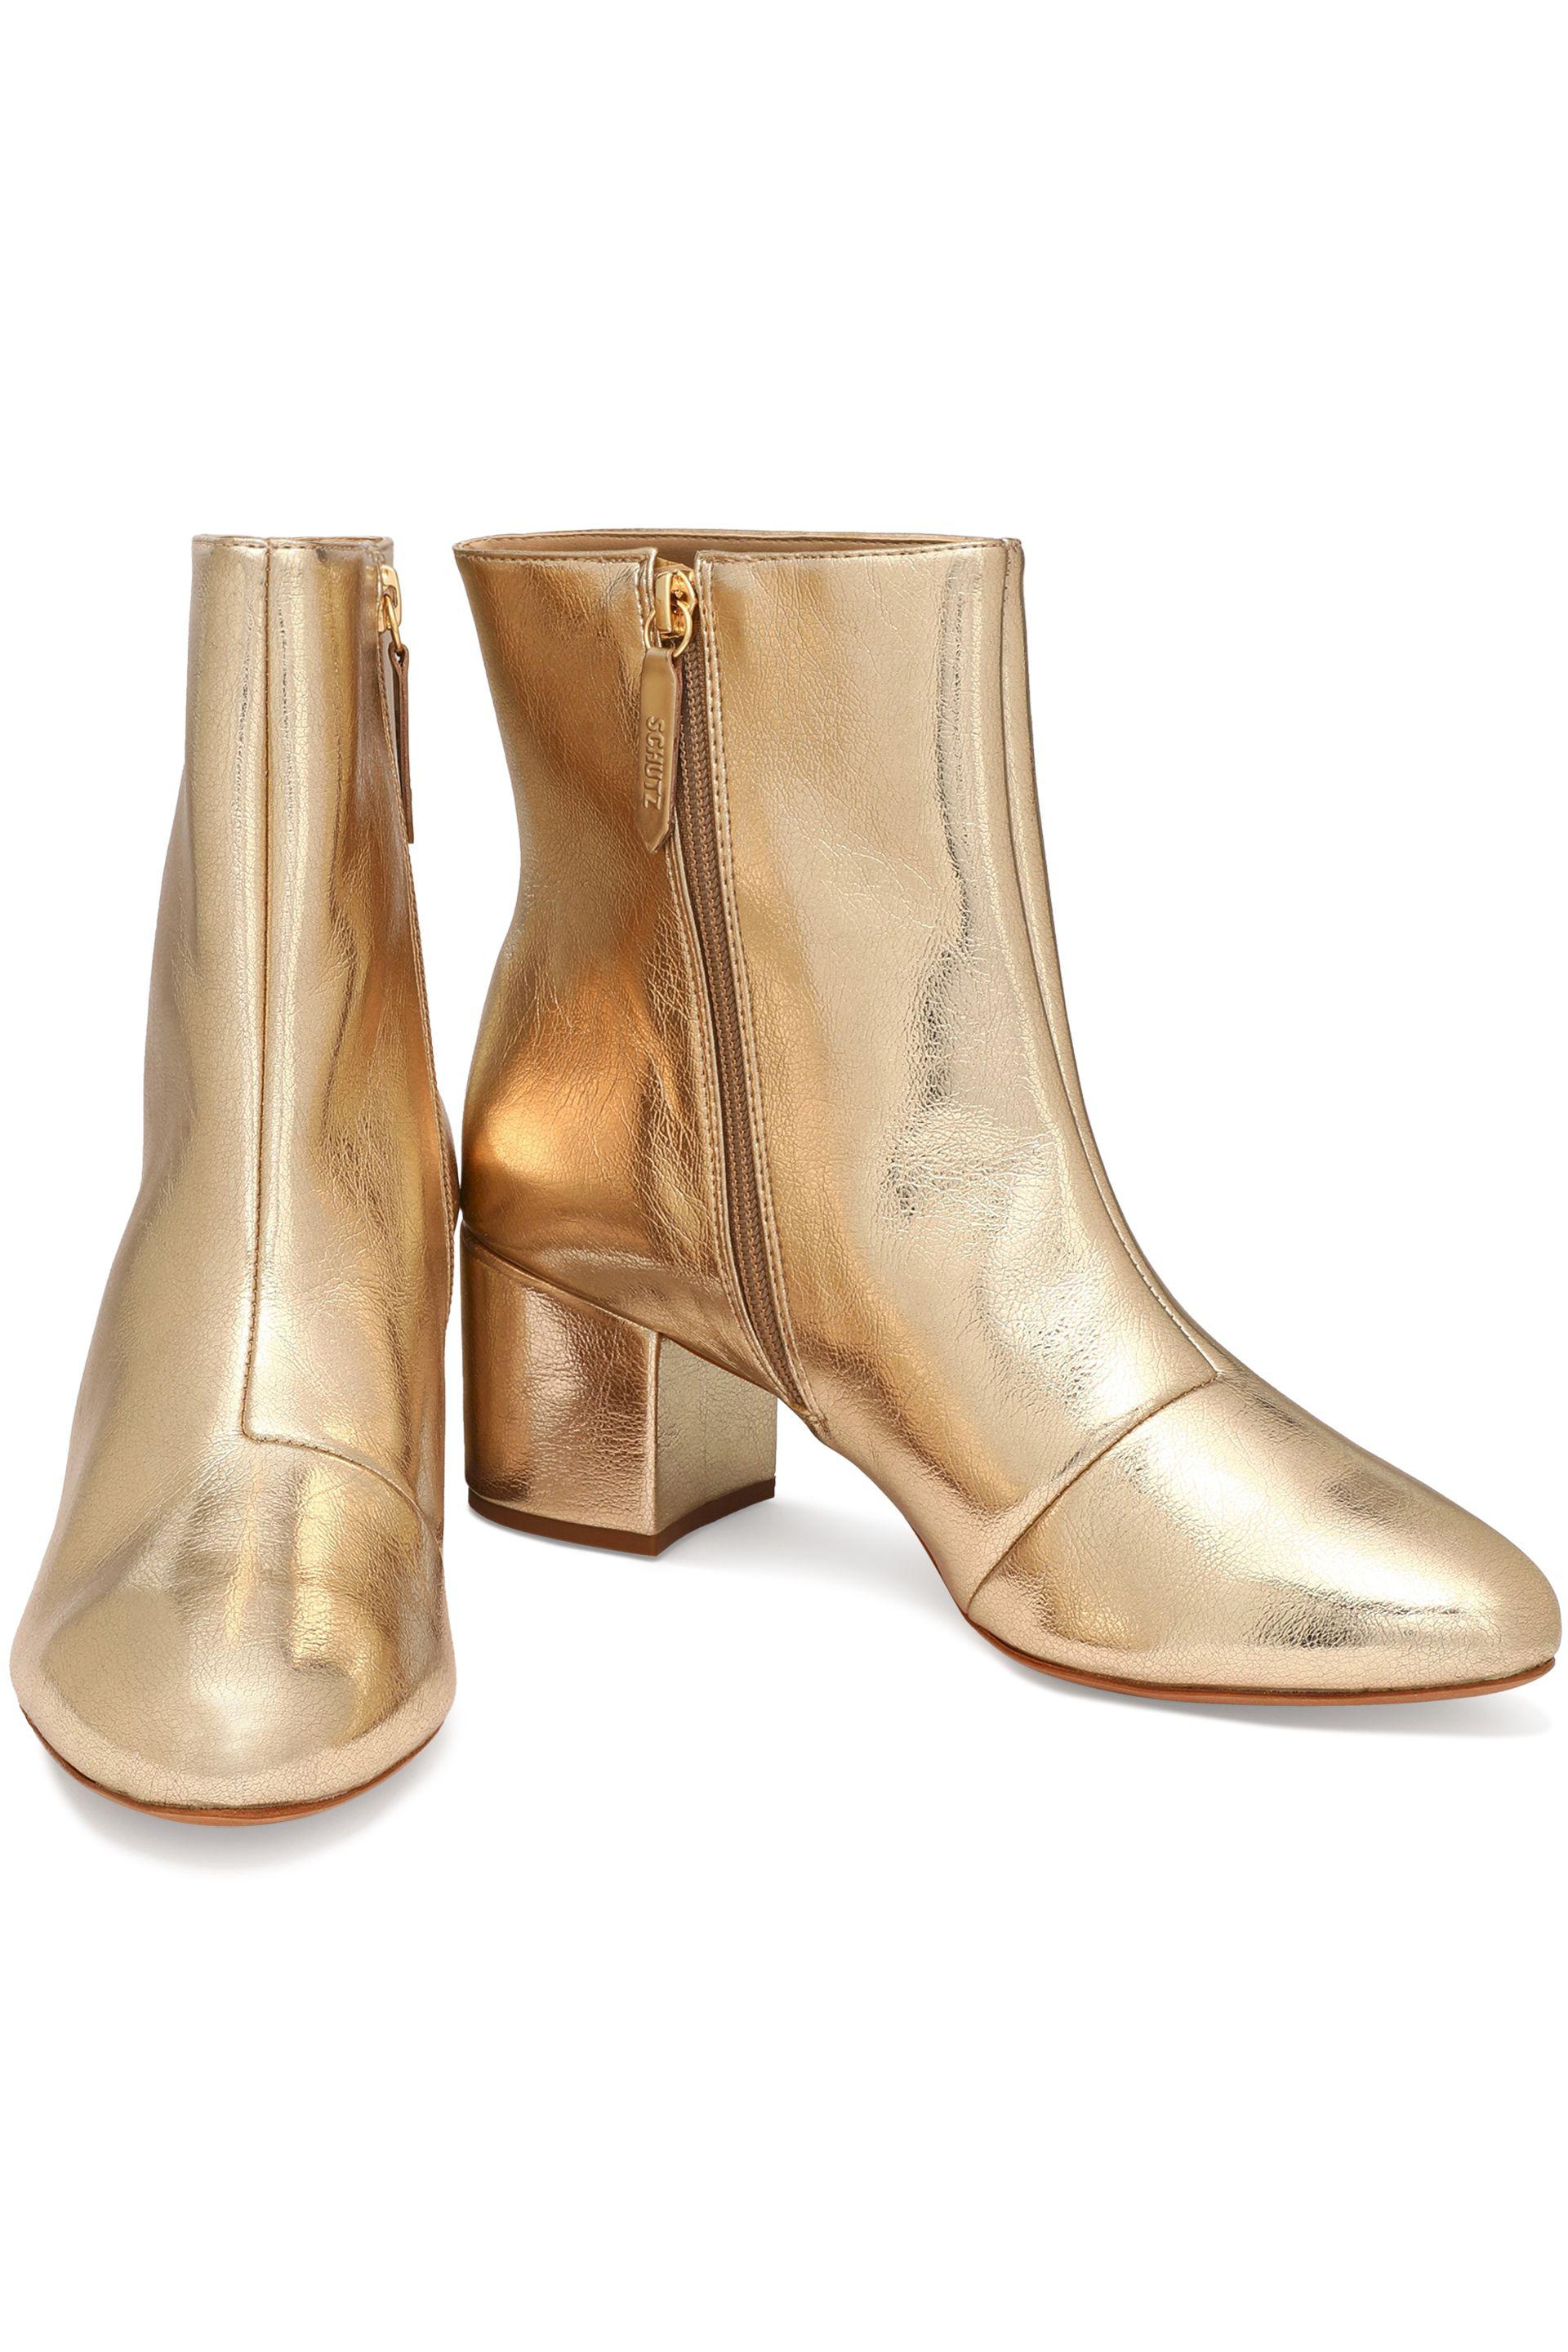 Schutz Leather Ankle Boots in Gold (Metallic) | Lyst